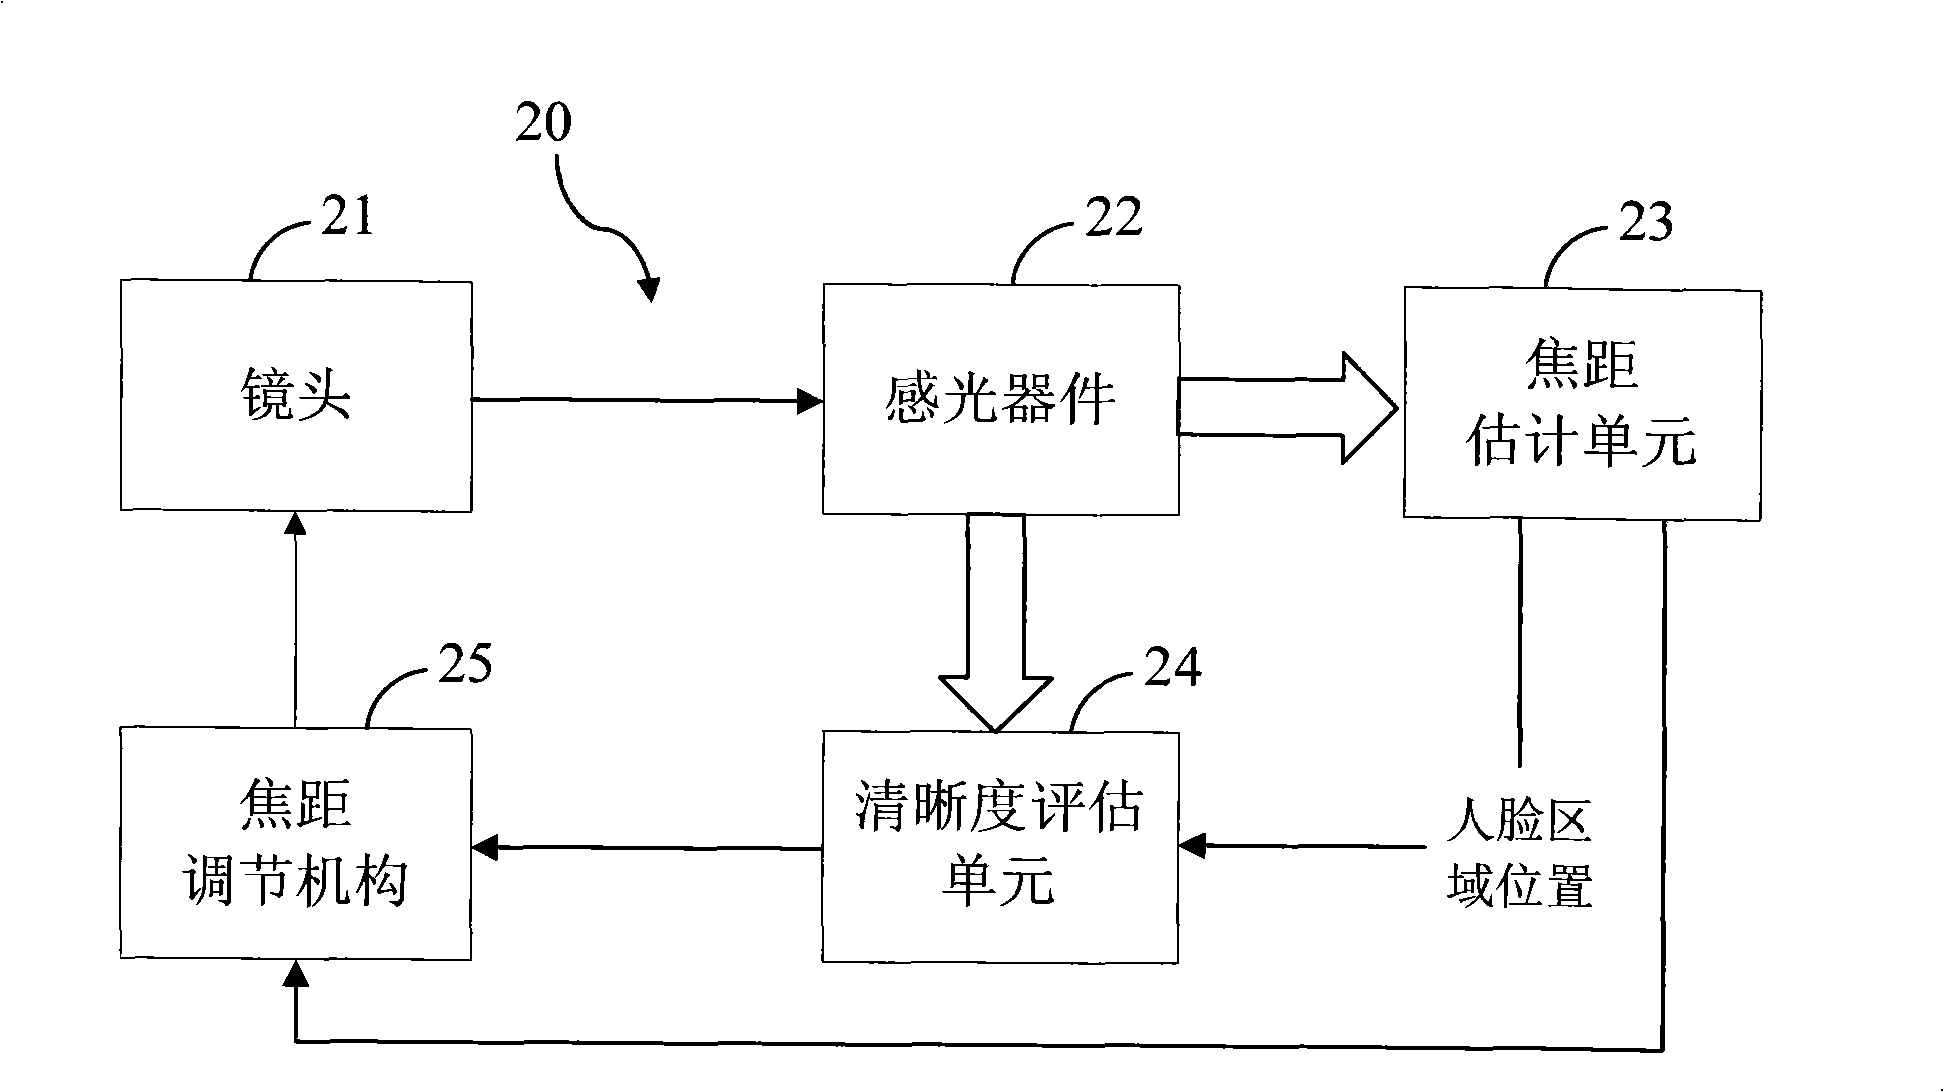 Automatic focusing method and image collecting device